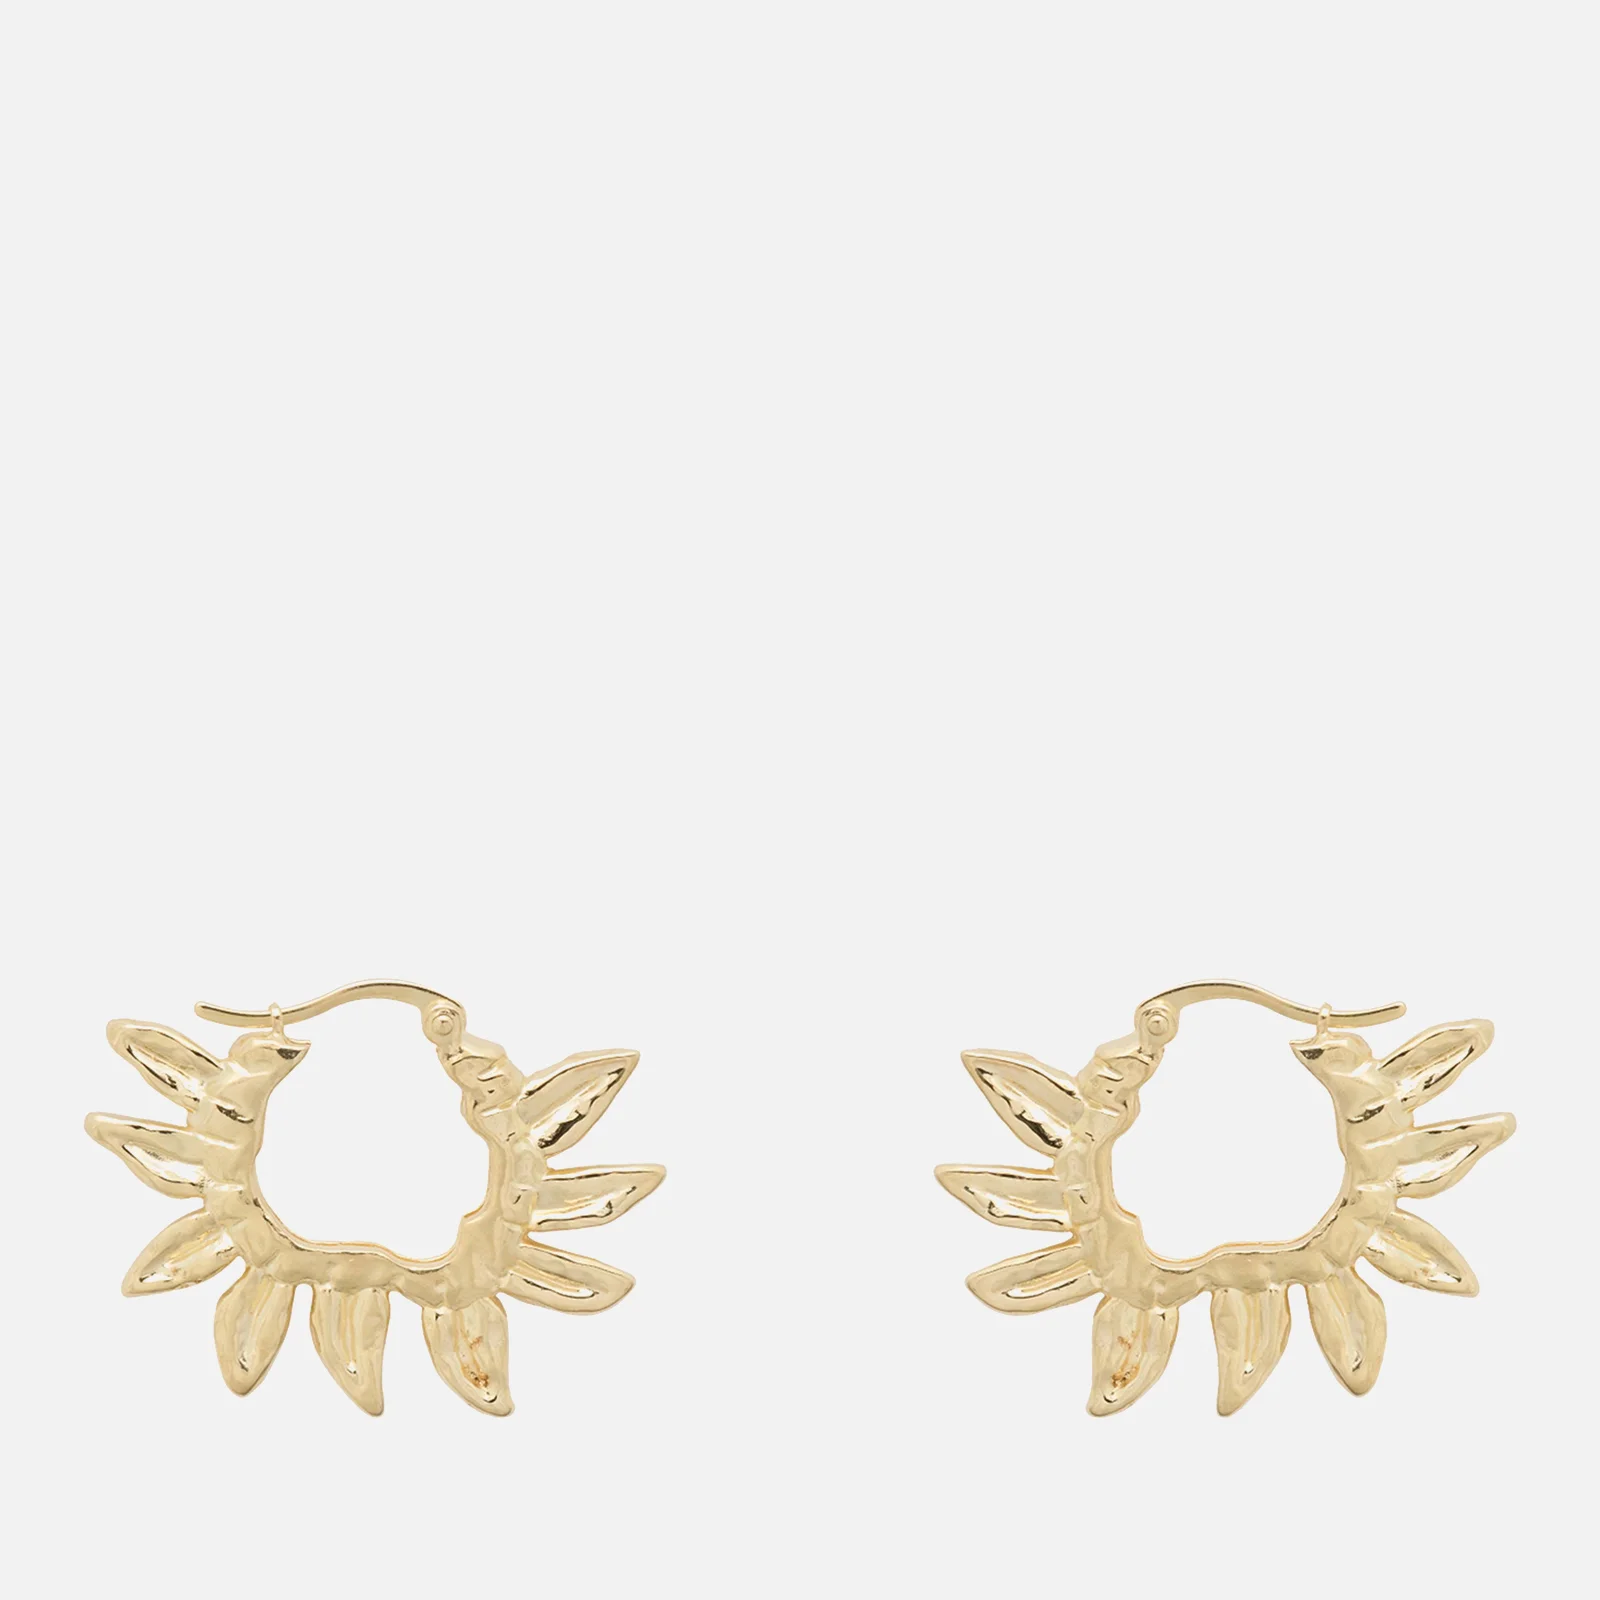 anna + nina Sunflower Petals Gold-Plated Sterling Silver Hoop Earrings Image 1